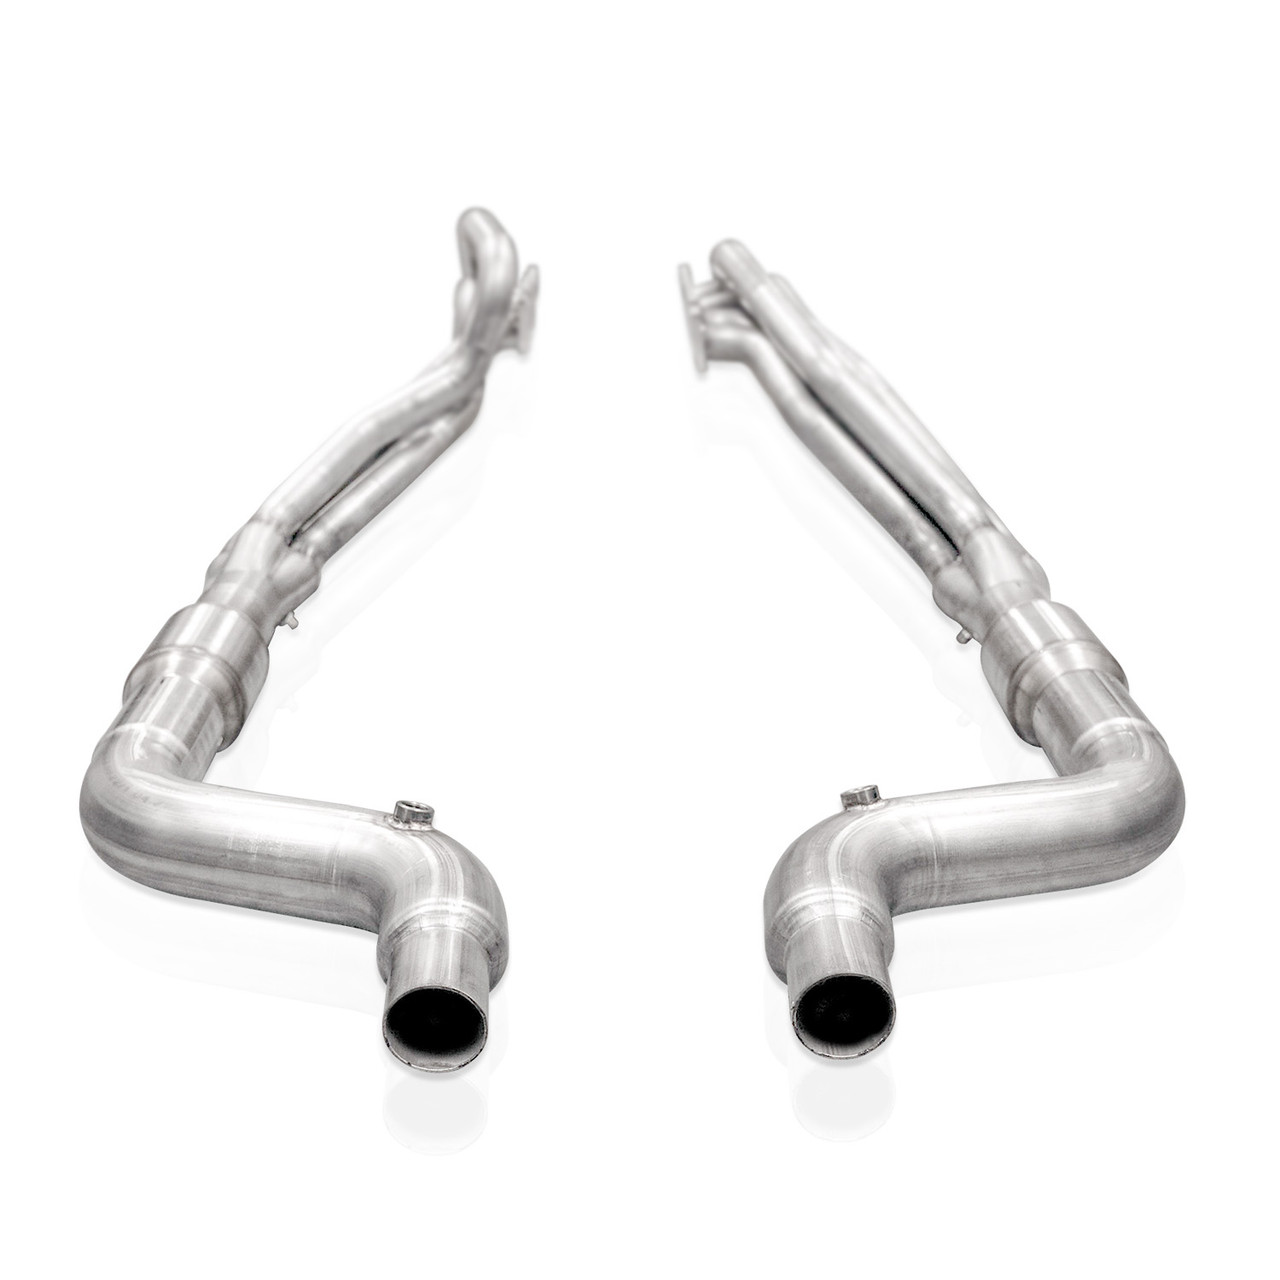 Stainless Works 1 7/8" Long Tube Headers w. High Flow Cats / Performance Connect - S550 / S650 Mustang (M24H3CAT)